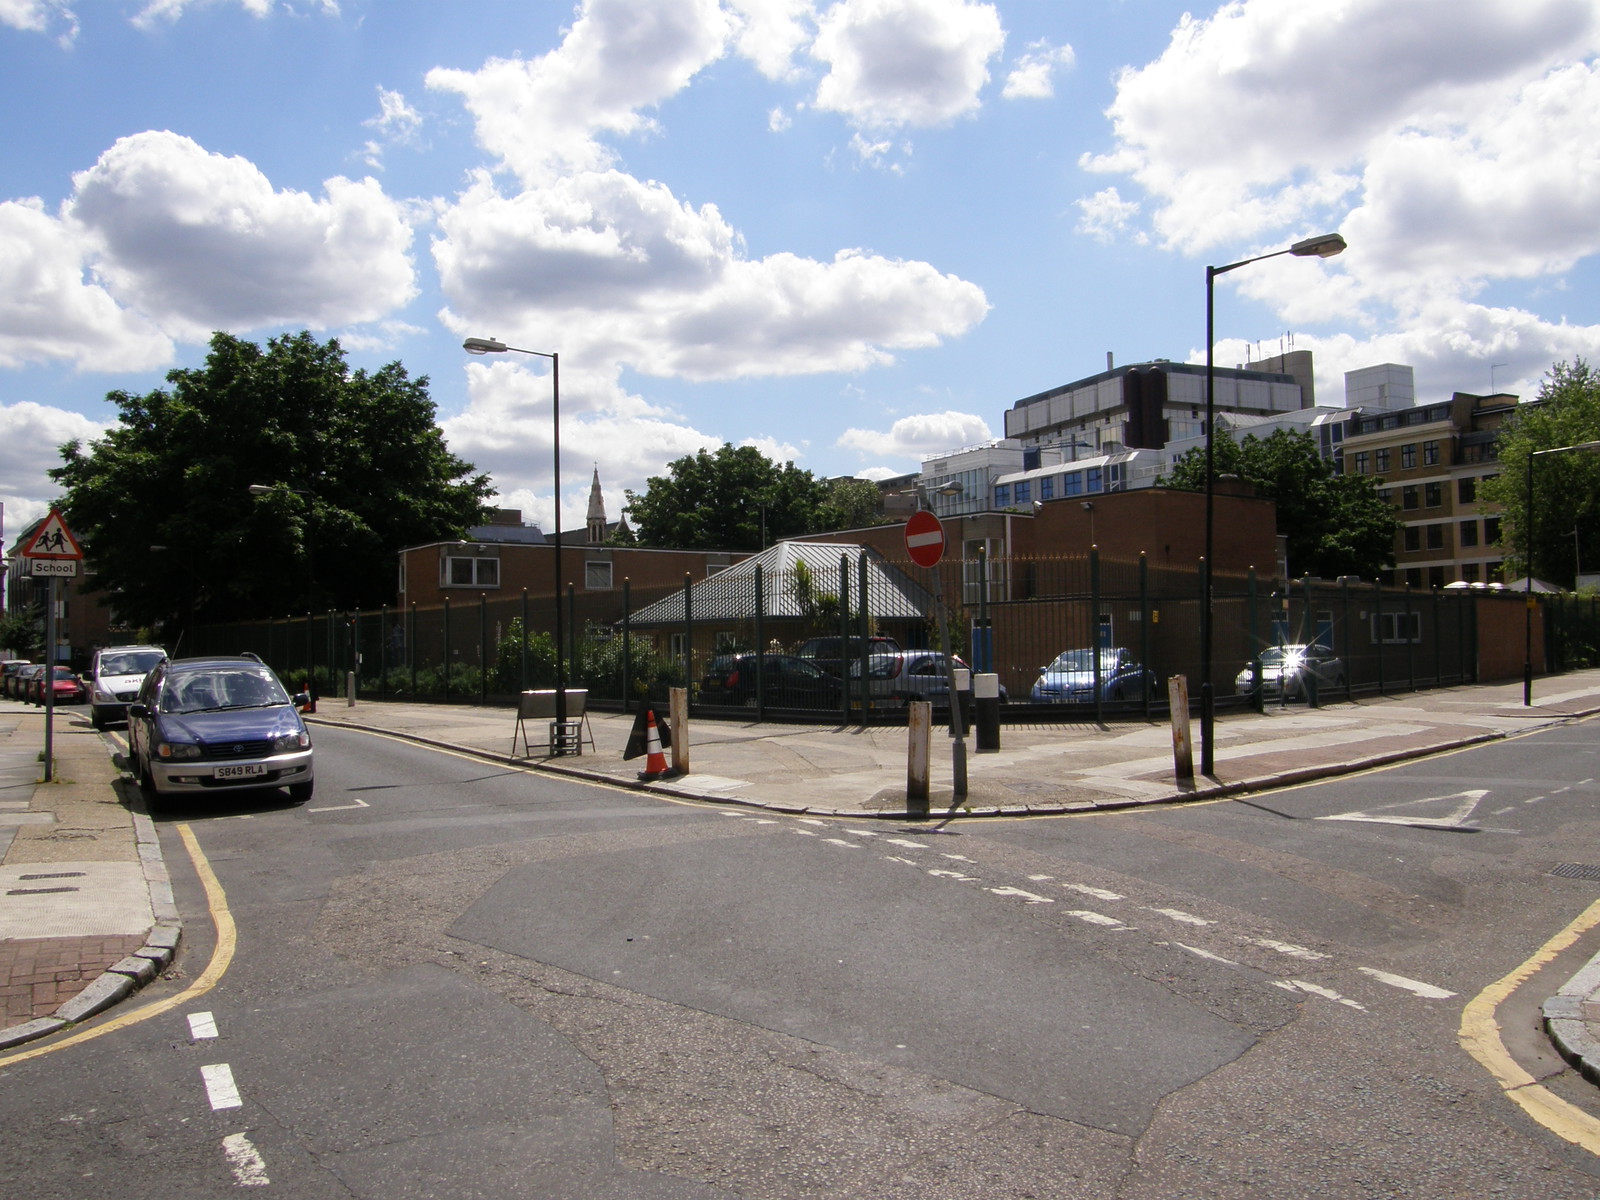 Image from Victoria to Bow Road